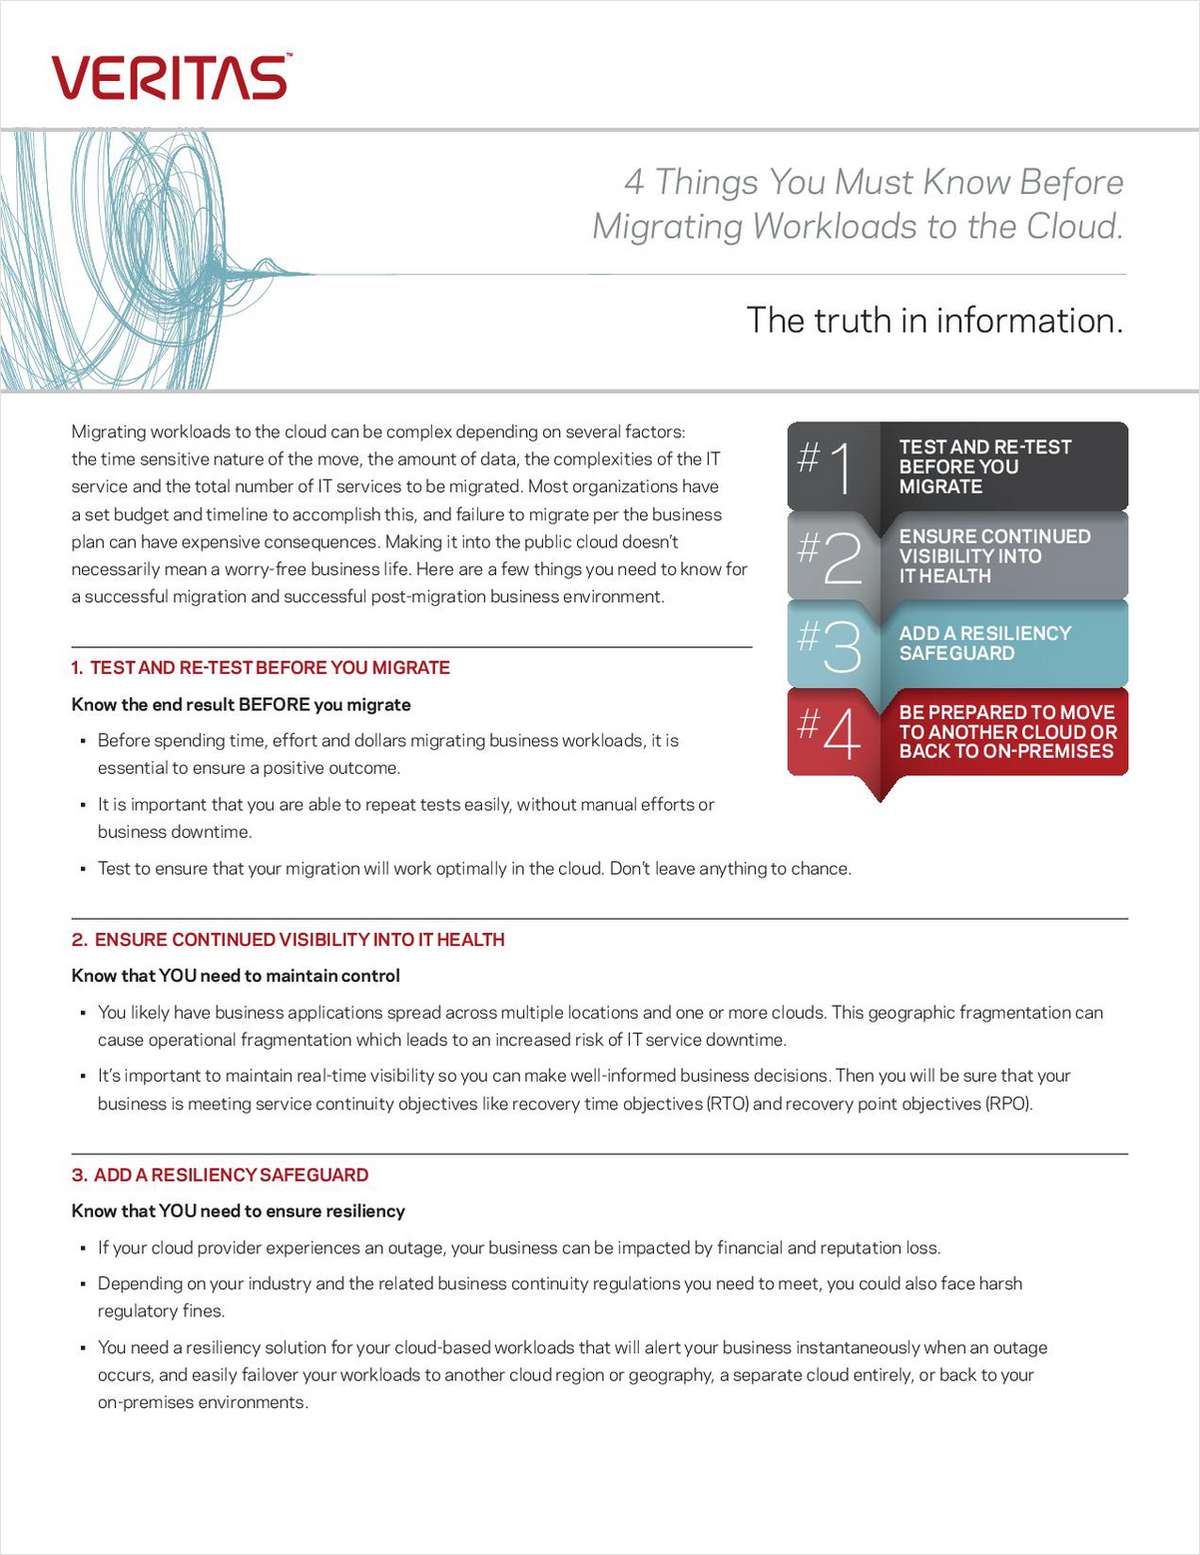 4 Things You Must Know Before Migrating Workloads to the Cloud